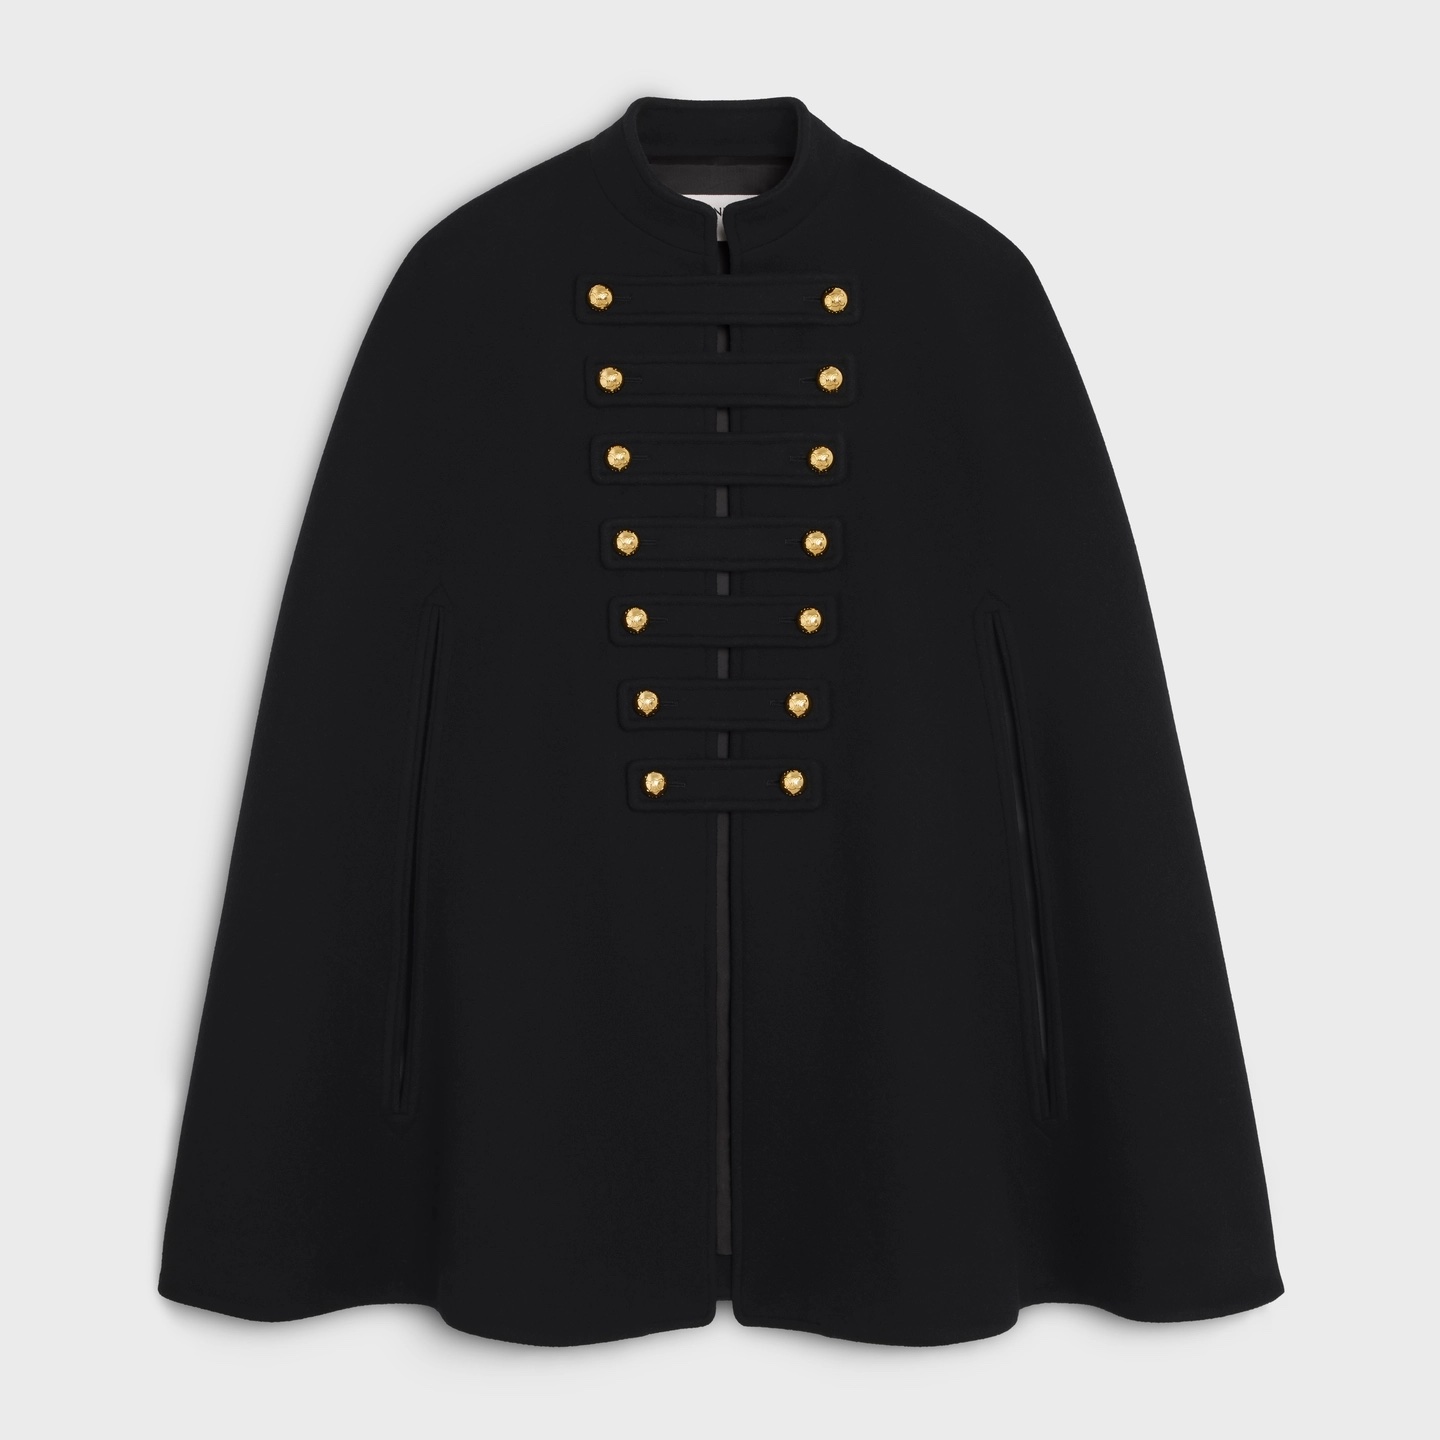 The Wick - Object Officer Cape by Celine